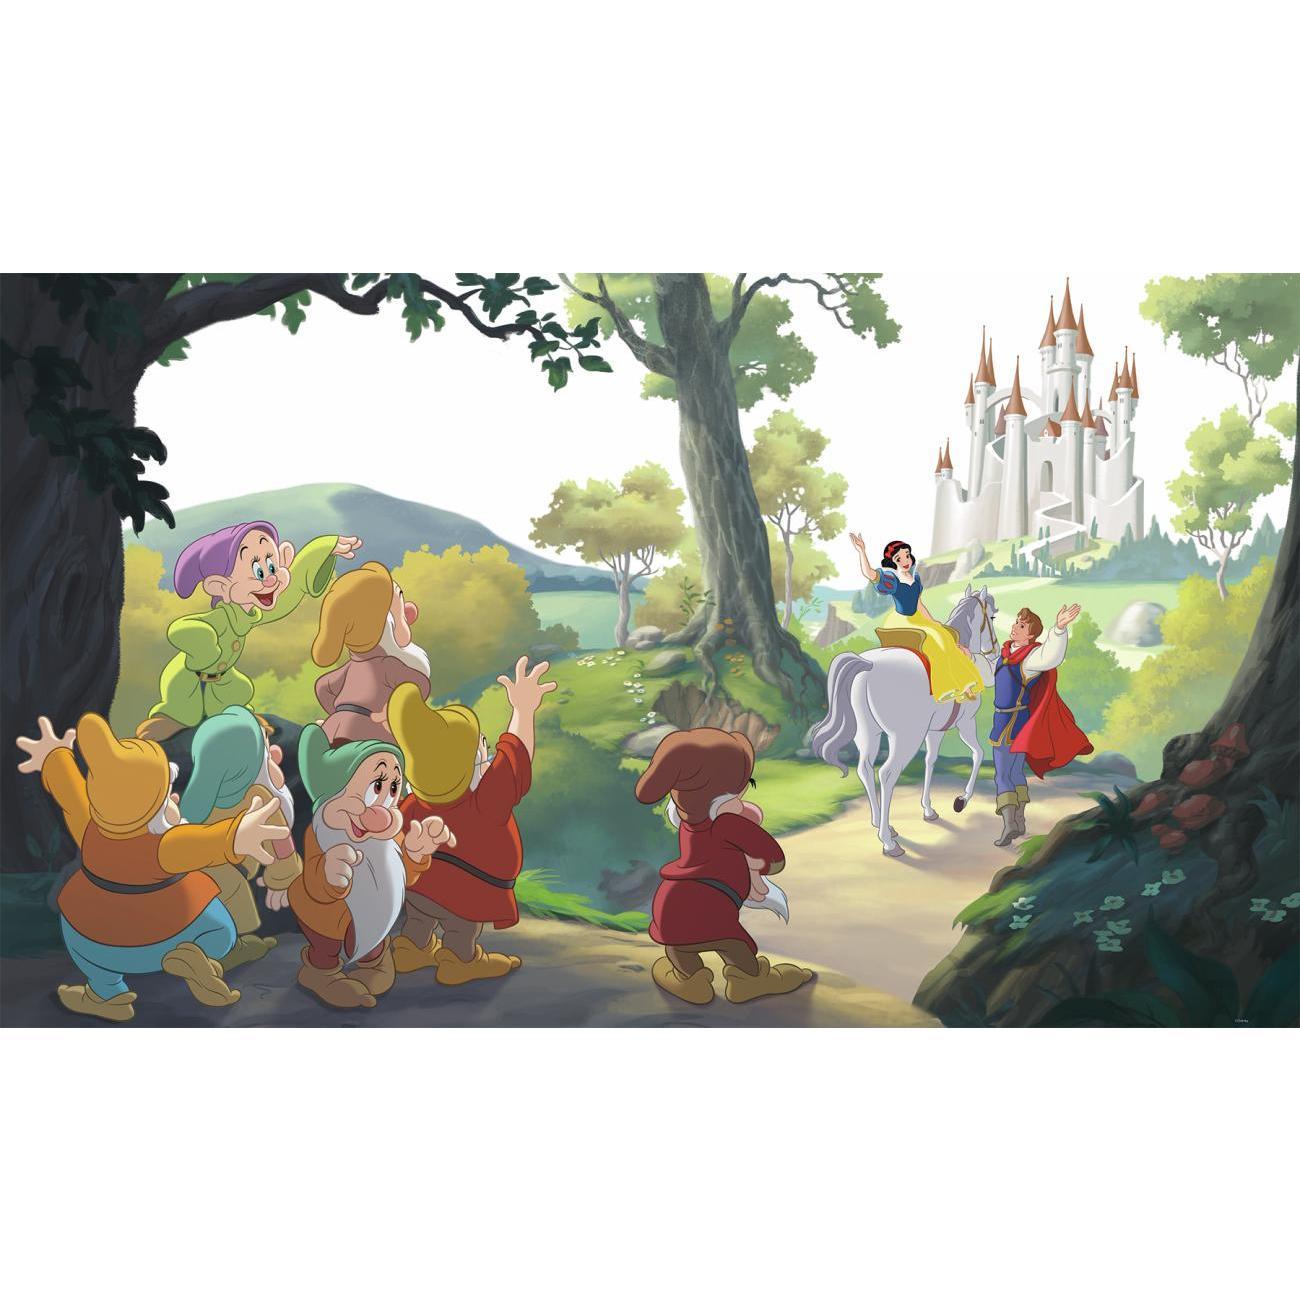 Disney Princess Snow White "Happily Ever After" XL Spray and Stick Wallpaper Mural Wall Murals RoomMates Mural  